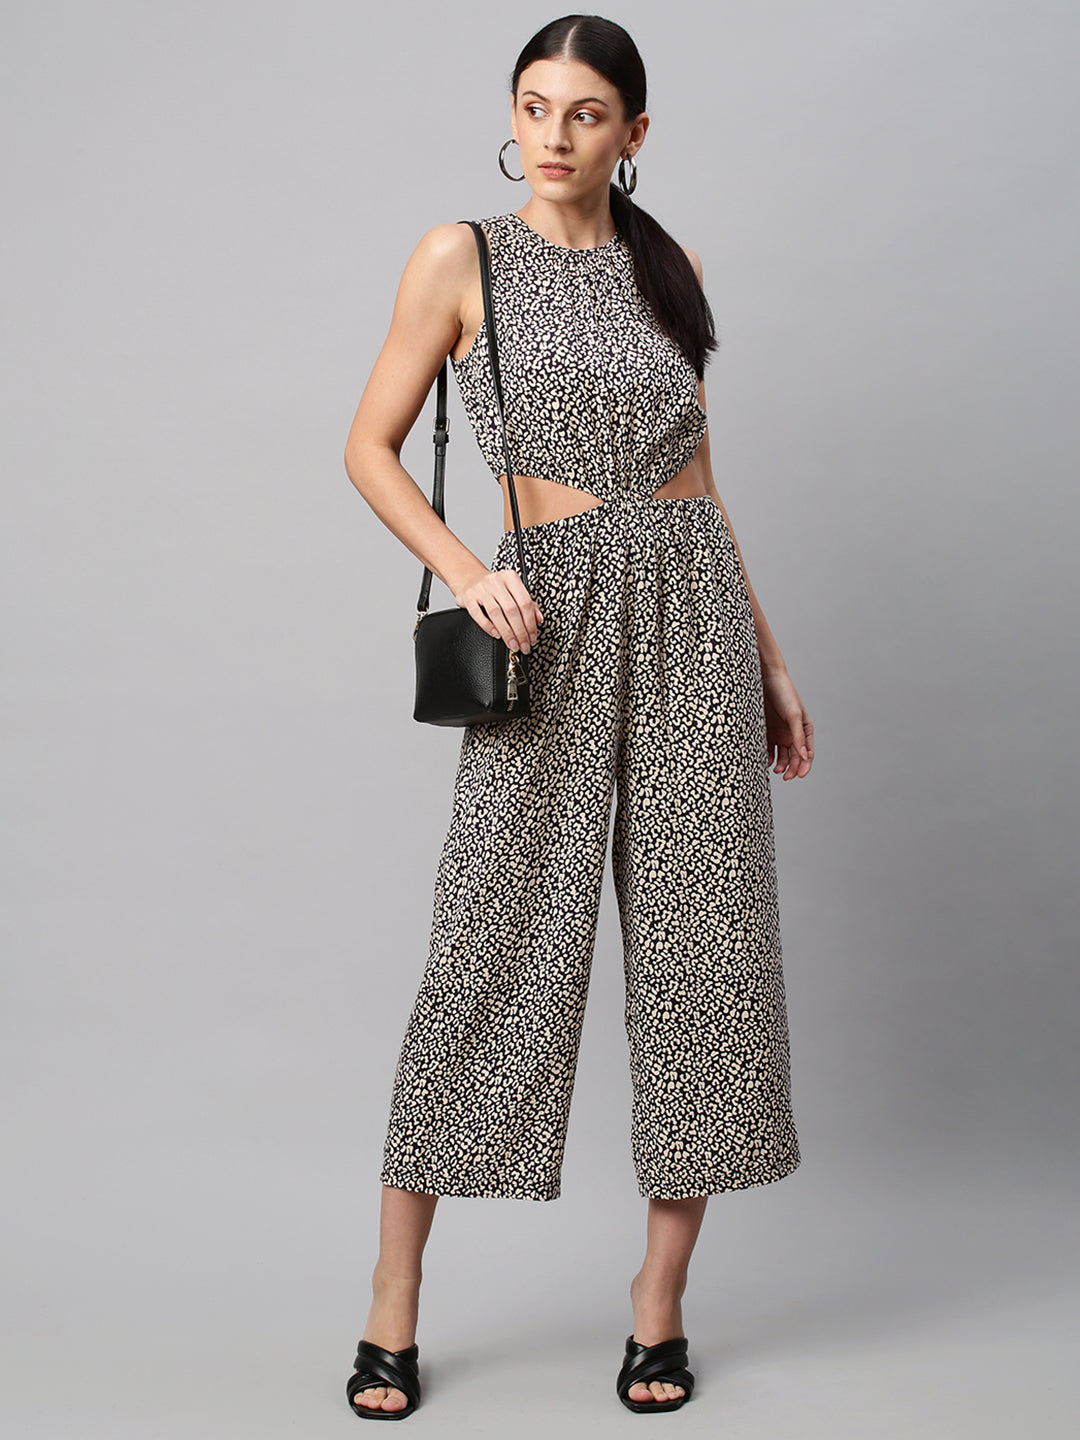 Leopard Printed Rayon Cut Out Jumpsuit